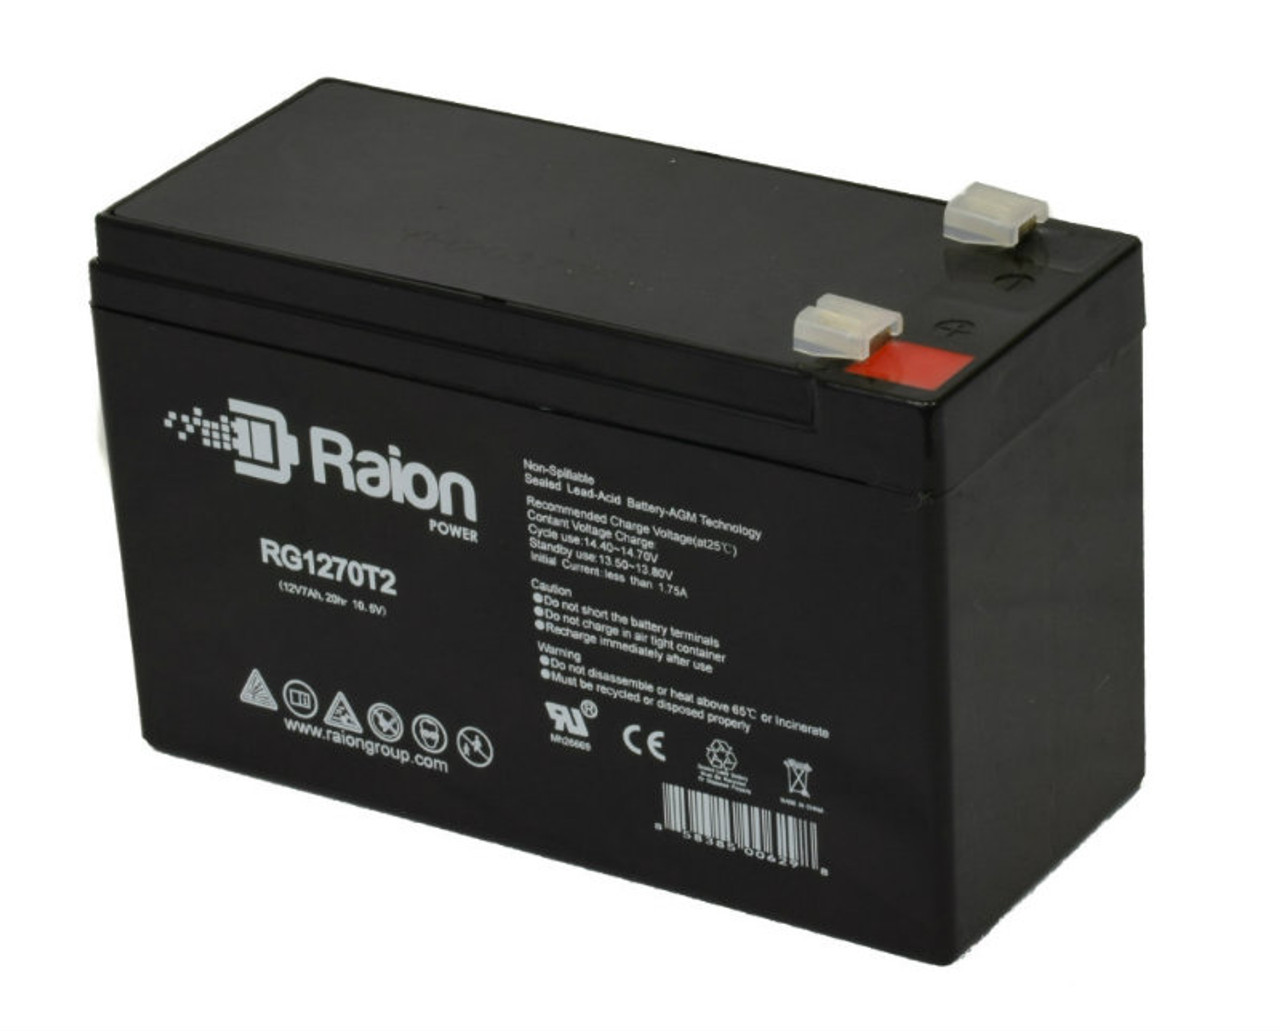 Raion Power RG1270T1 12V 7Ah Non-Spillable Replacement Battery for FirstPower FP1275